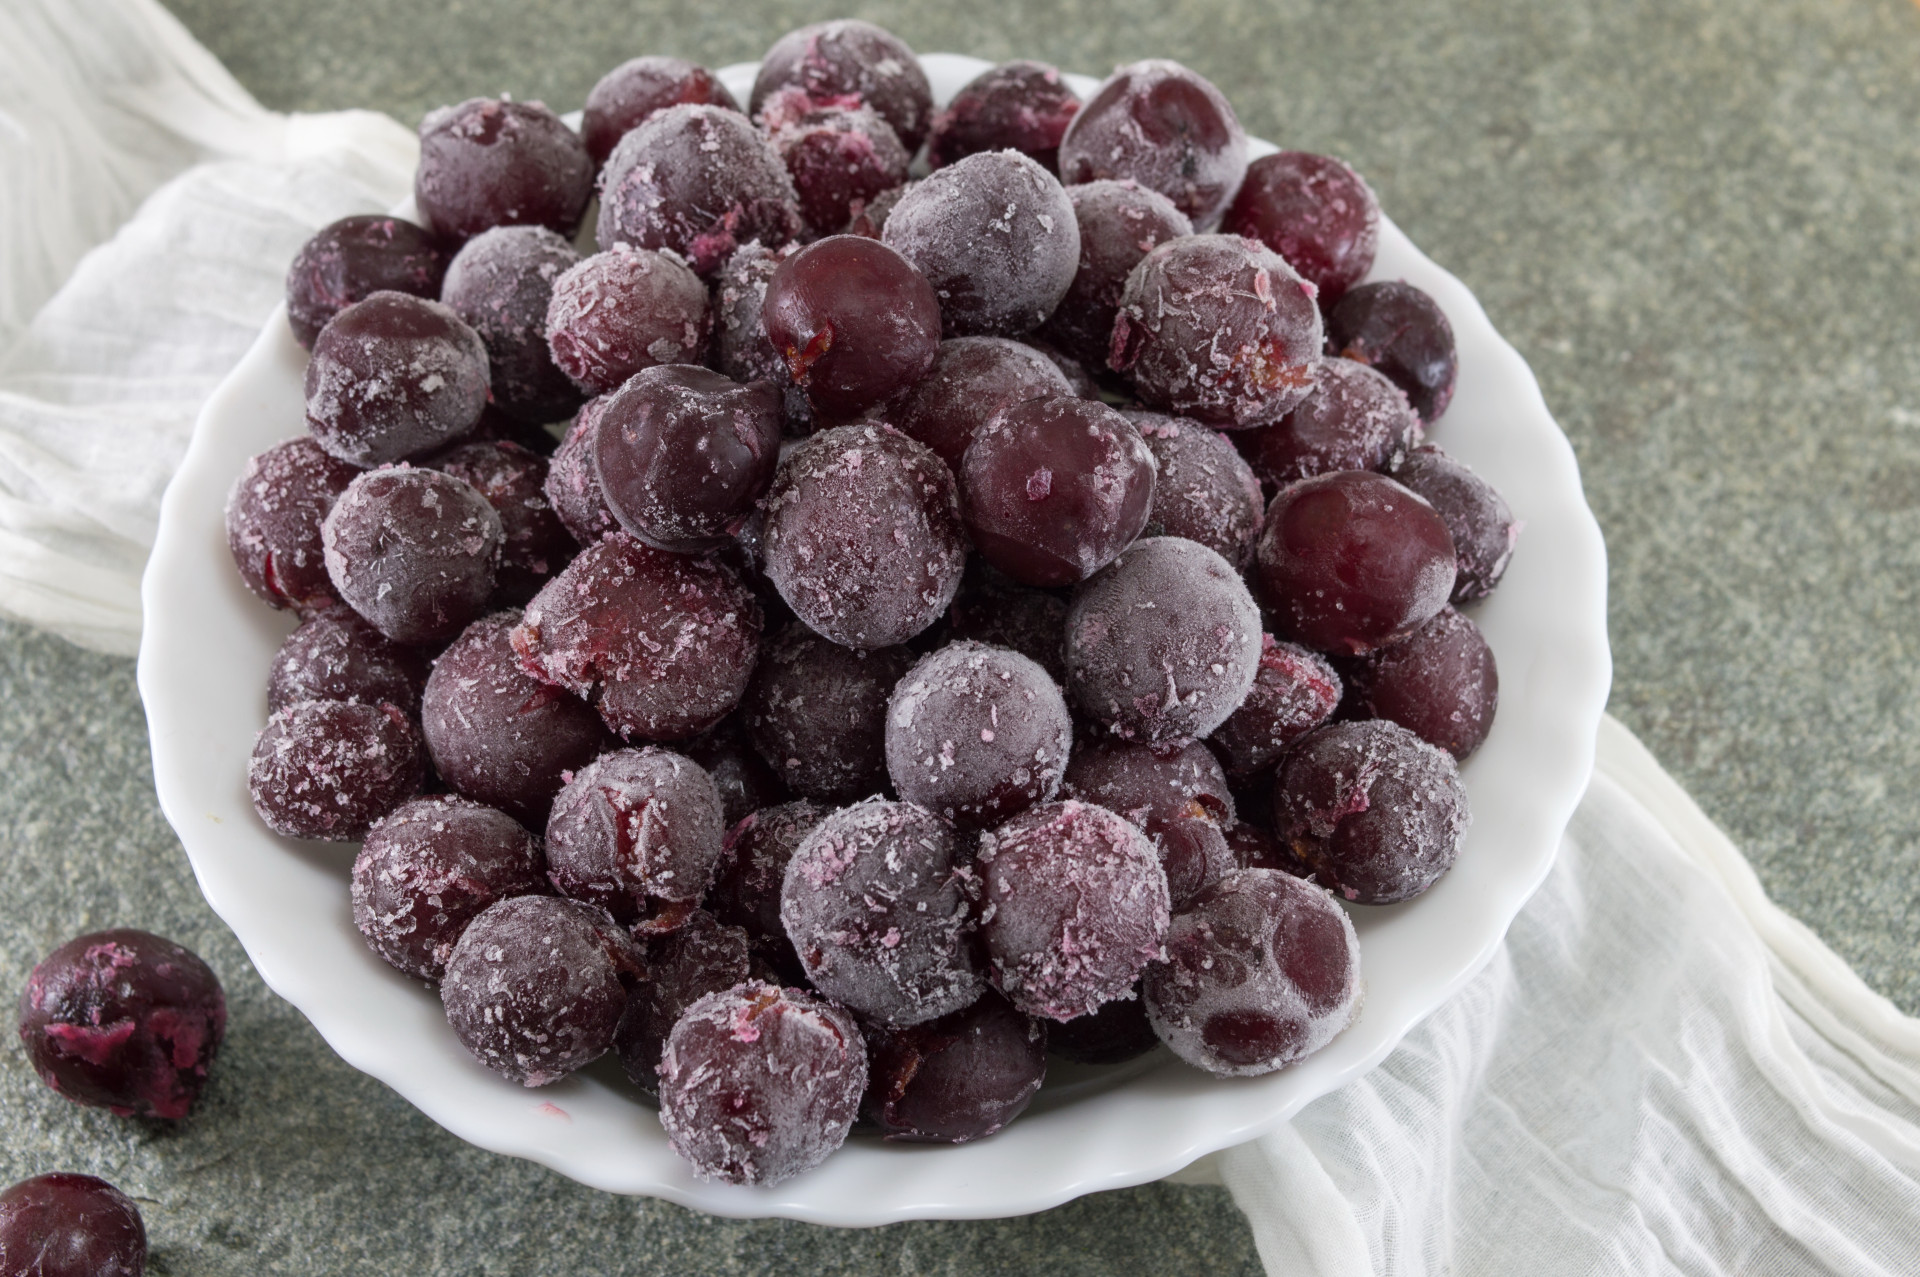 <span>Grapes run the risk of being squished, but if you freeze them before your flight, then pop them in a reusable on-the-go bag, you'll enjoy a refreshingly sweet and mess-free snack.</span><p>You may also like:<a href="https://www.starsinsider.com/n/202739?utm_source=msn.com&utm_medium=display&utm_campaign=referral_description&utm_content=356024v3en-us"> The most dramatic actor transformations for a role</a></p>